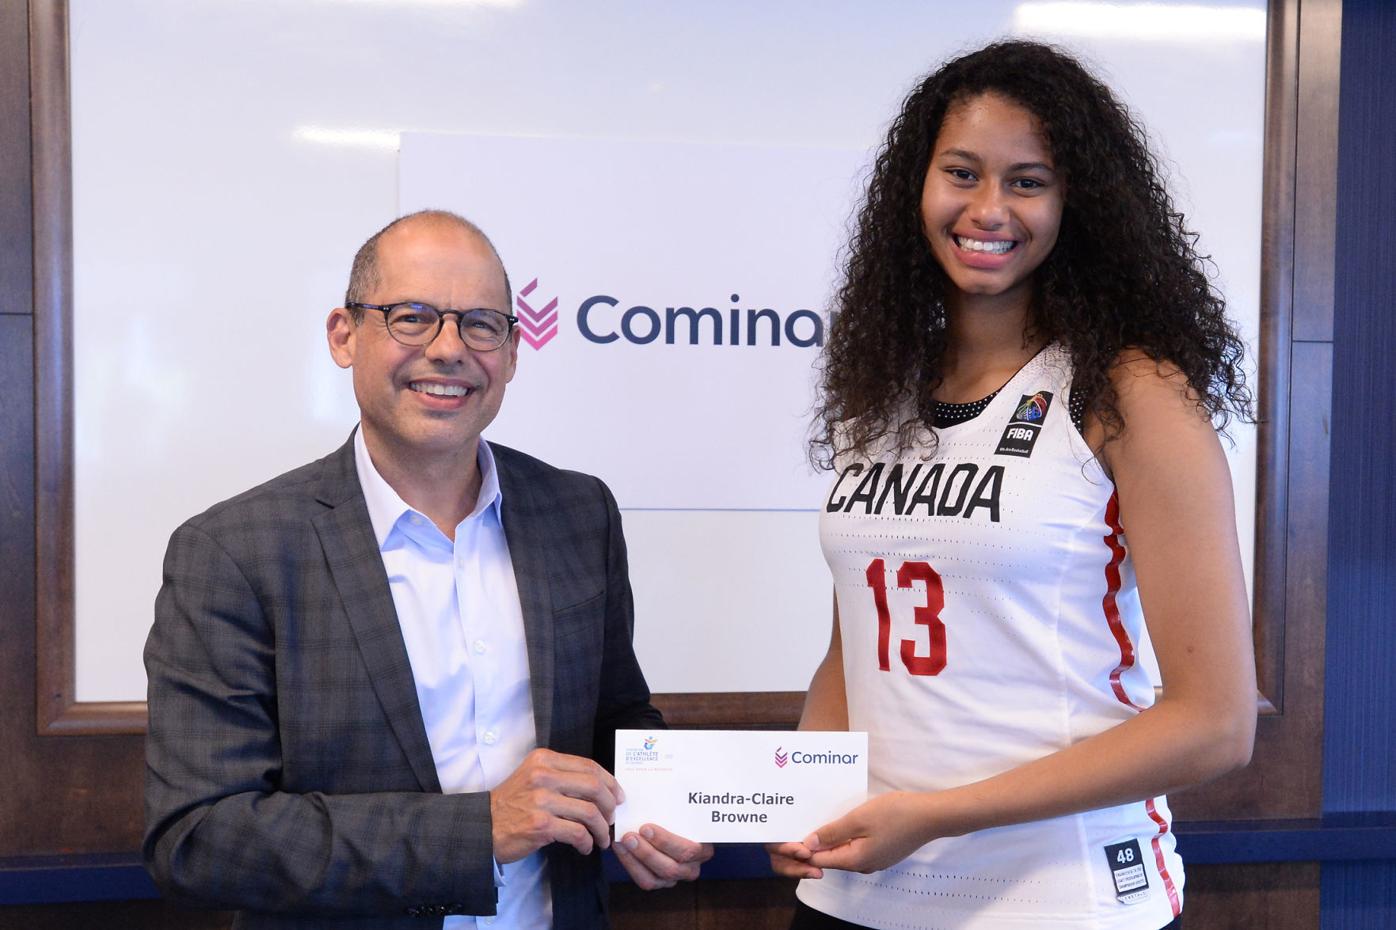 Success on the hardwood and in class earns bursary for Pointe Claire's  Kiandra-Claire Browne, Sports